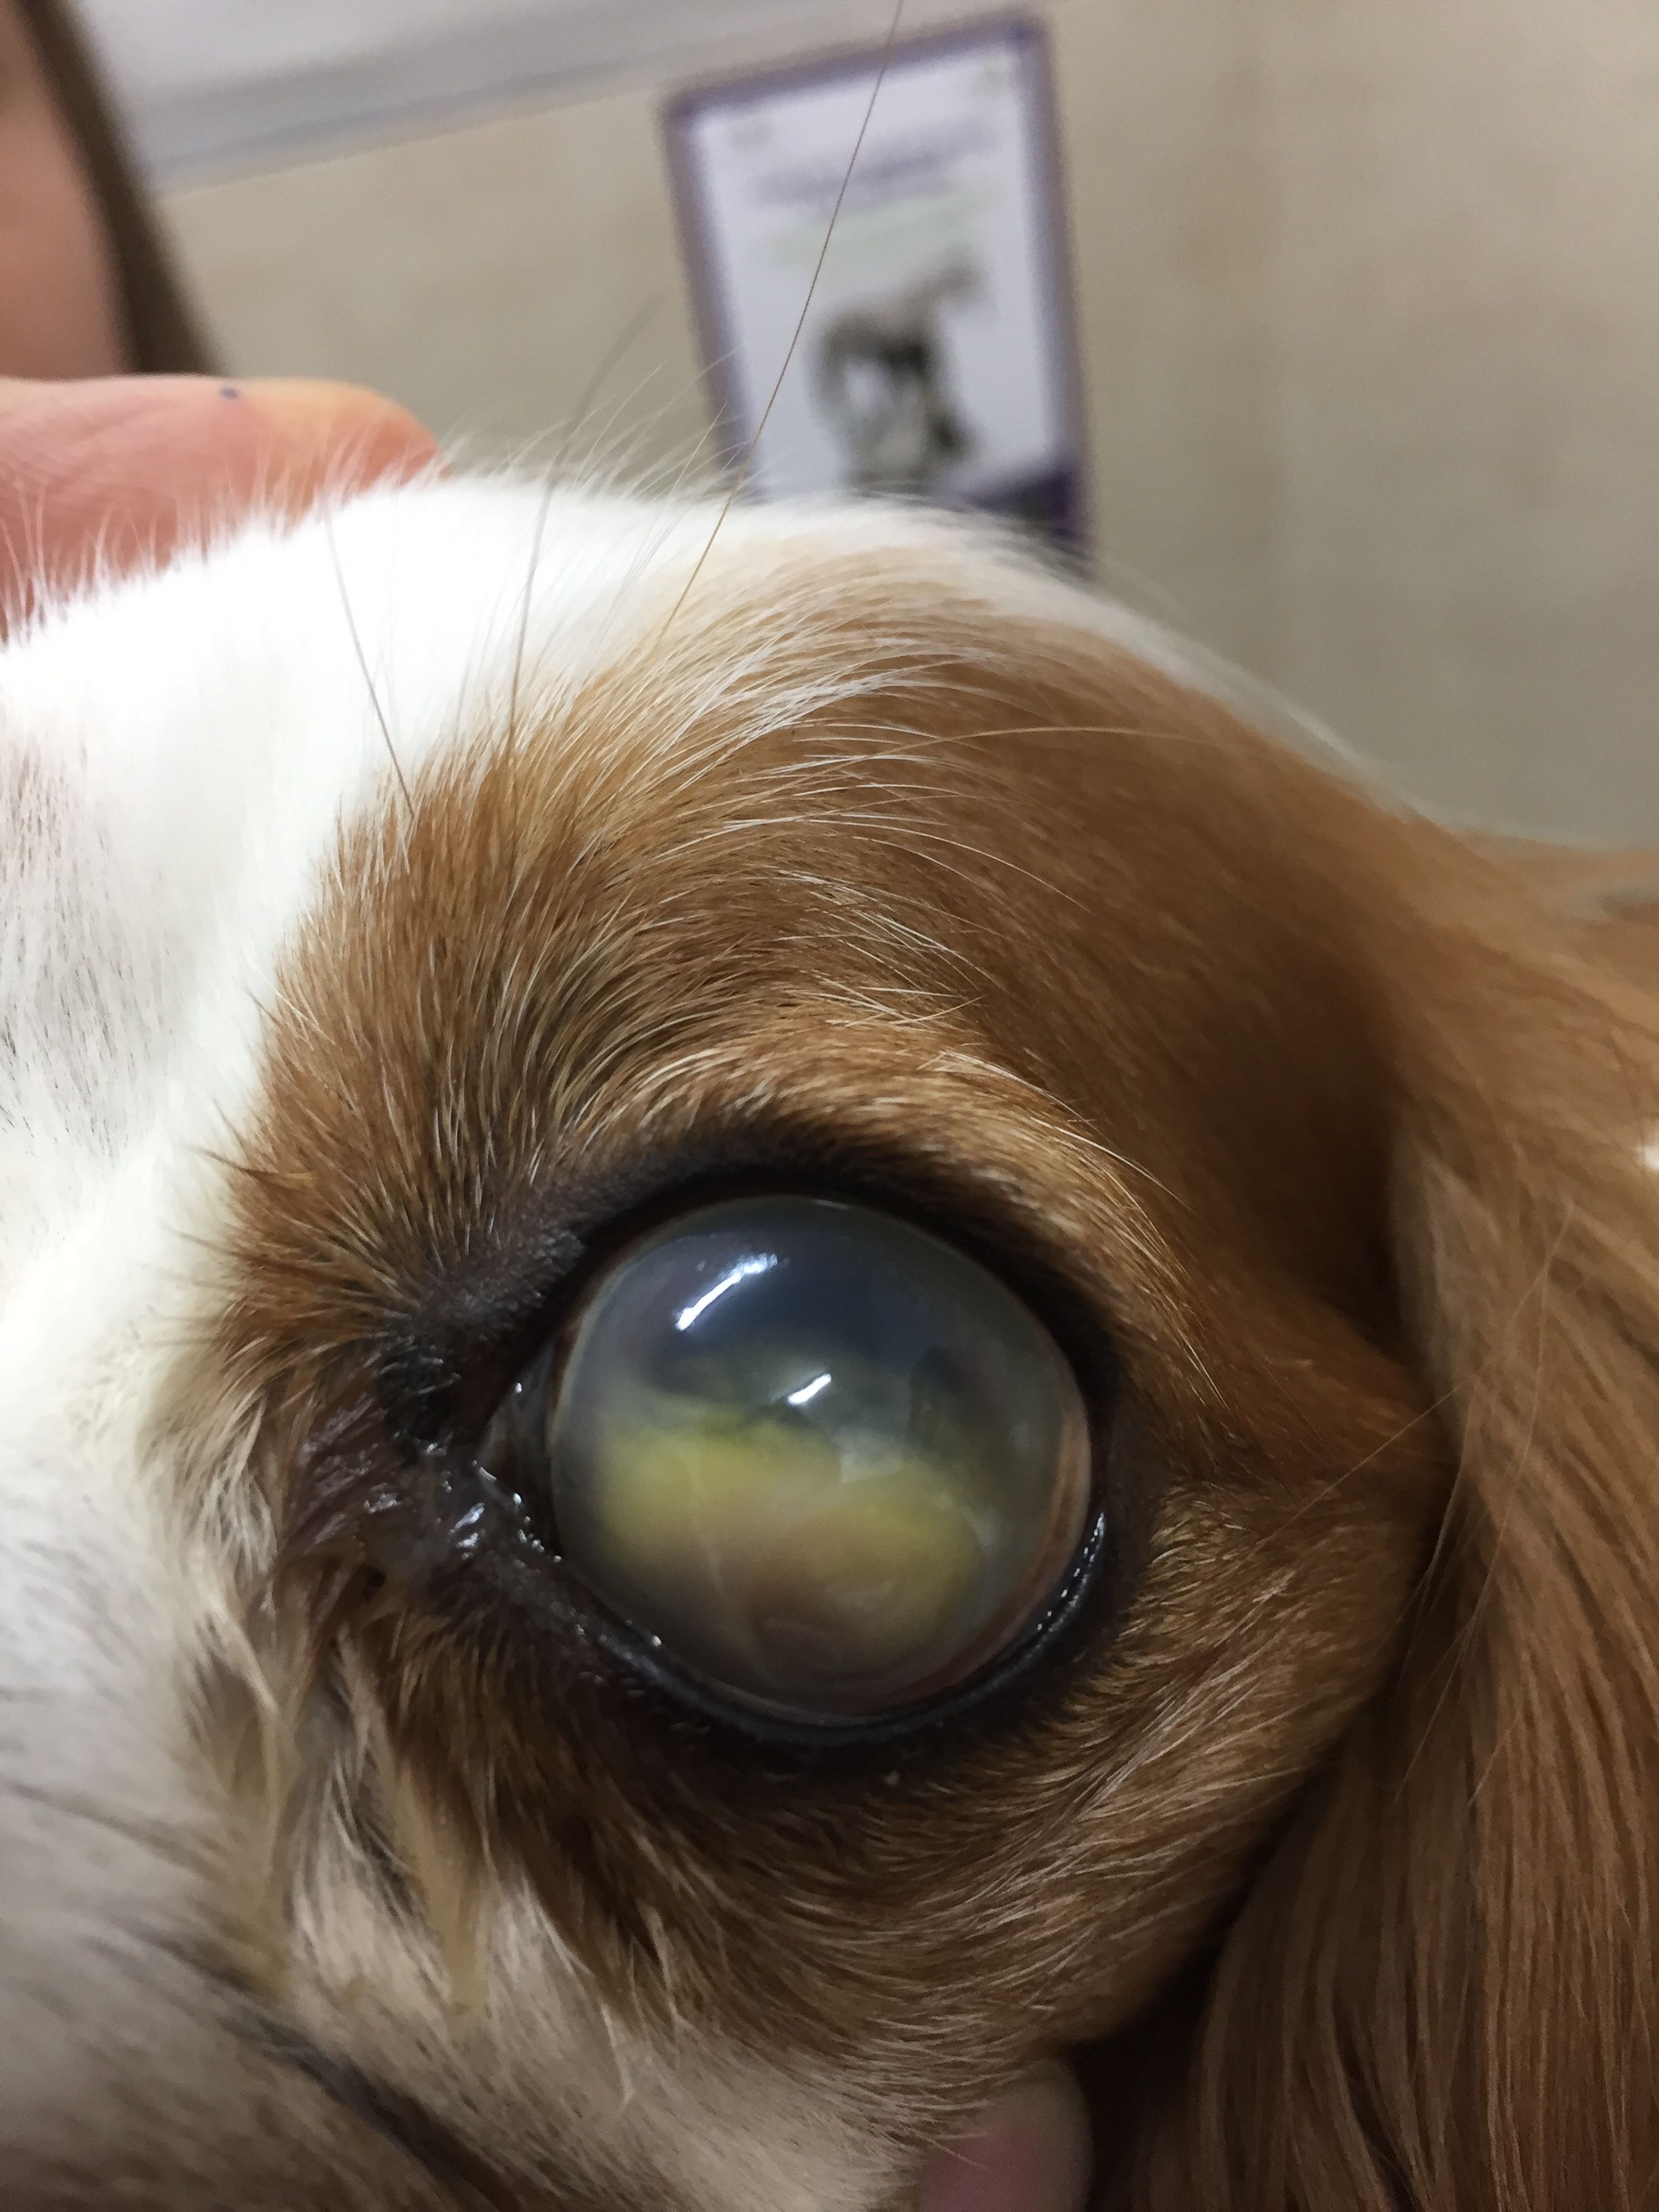 are puppies eyes cloudy when they first open